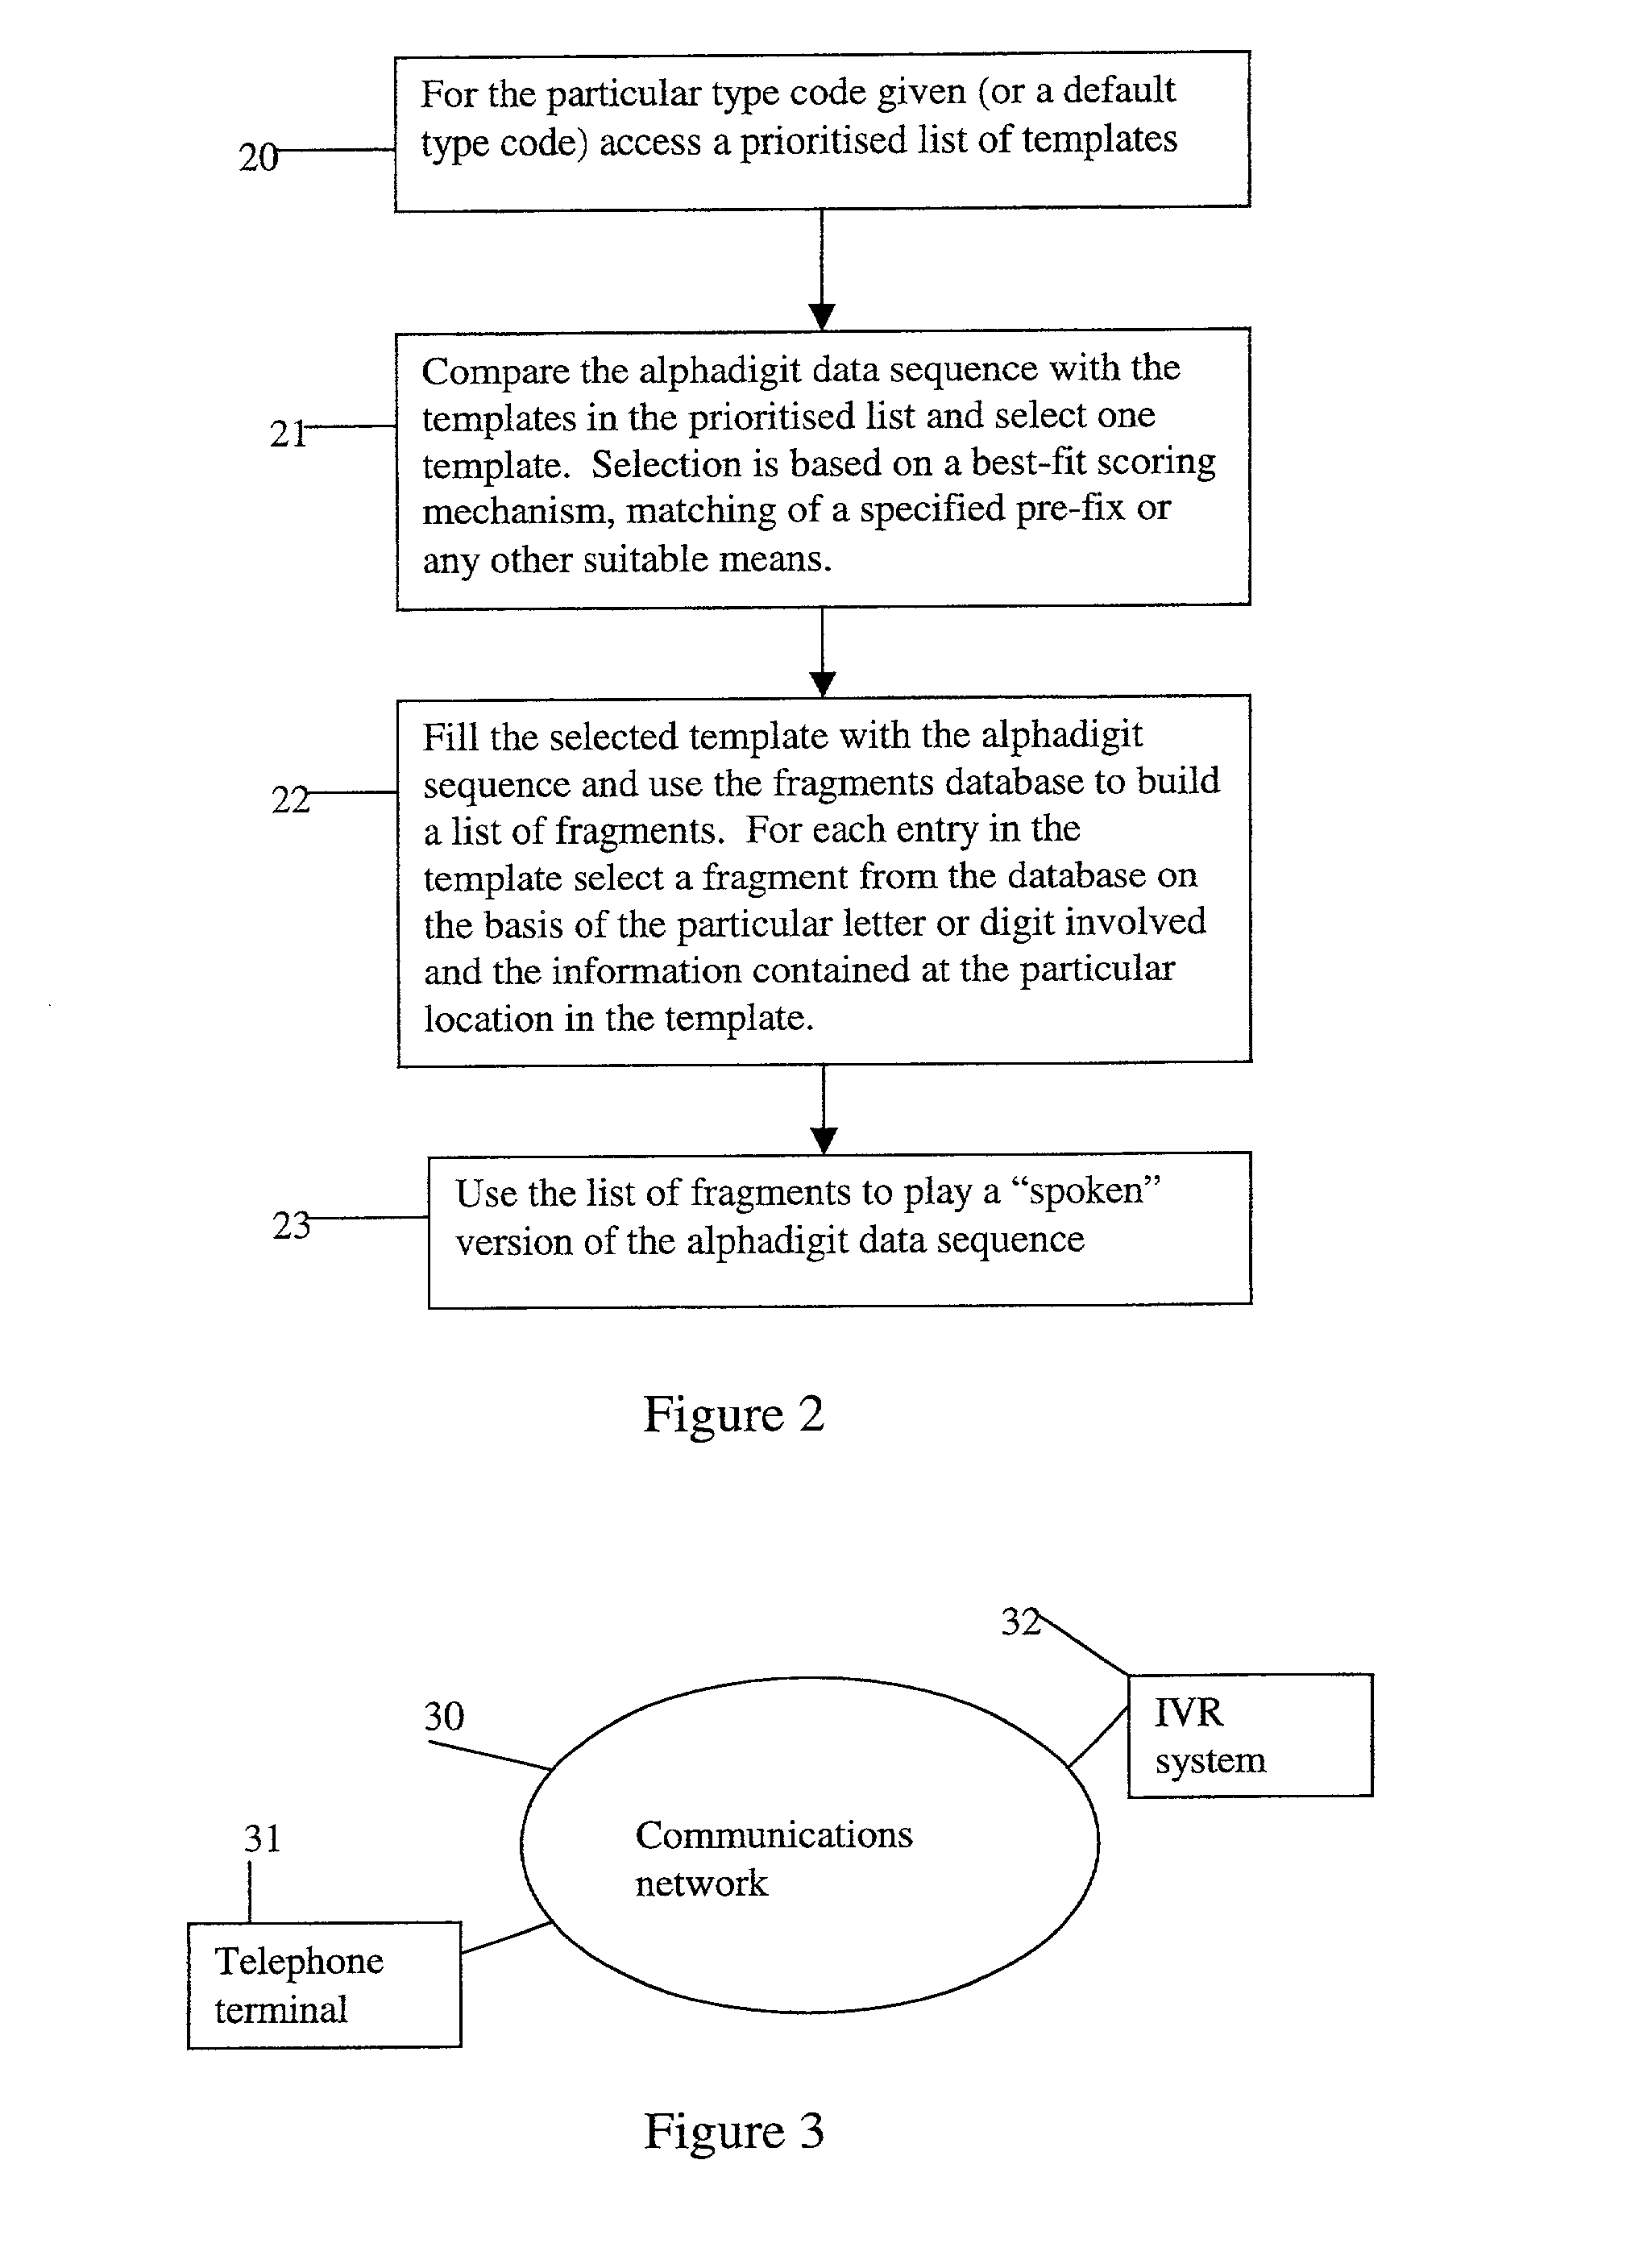 Method and apparatus for playing recordings of spoken alphanumeric characters